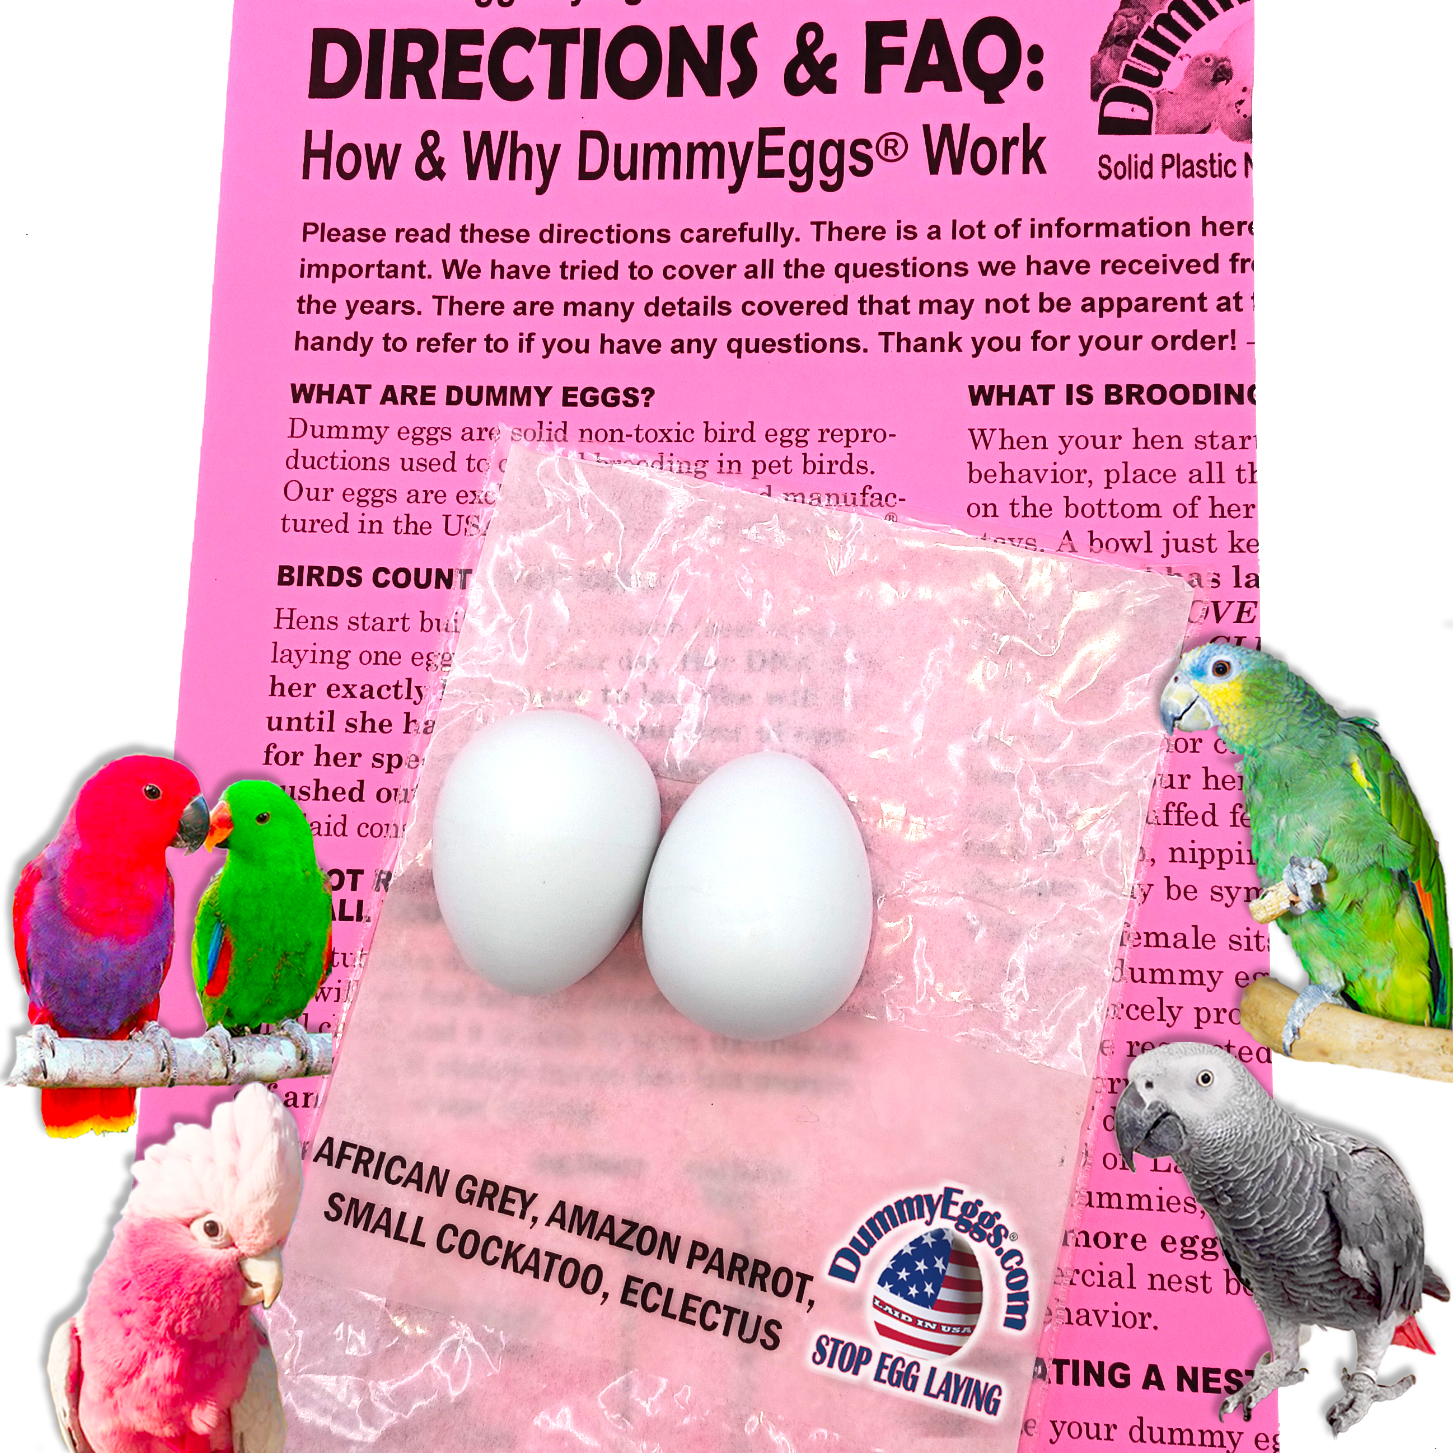 MEDIUM PARROT DummyEggs® for AFRICAN GREY, ECLECTUS, AMAZON PARROT, SMALL COCKATOO, MACAW, PIGEON